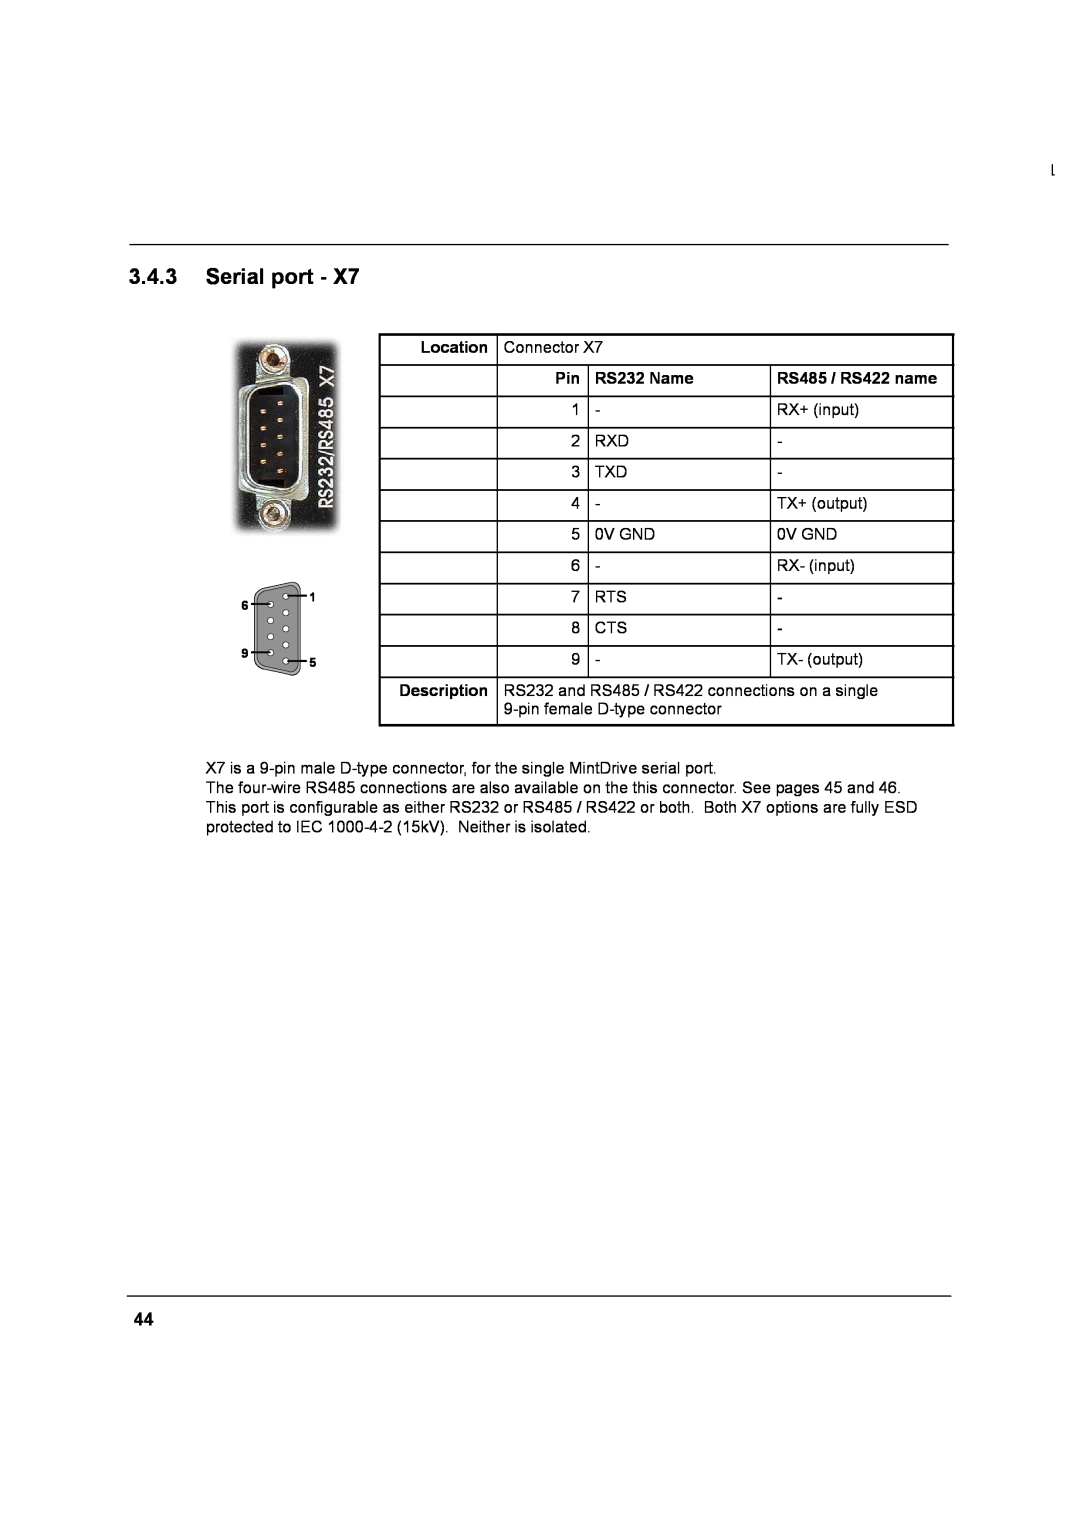 Baldor MN1274 06/2001 installation manual Serial port, Location, RS232 Name, RS485 / RS422 name 